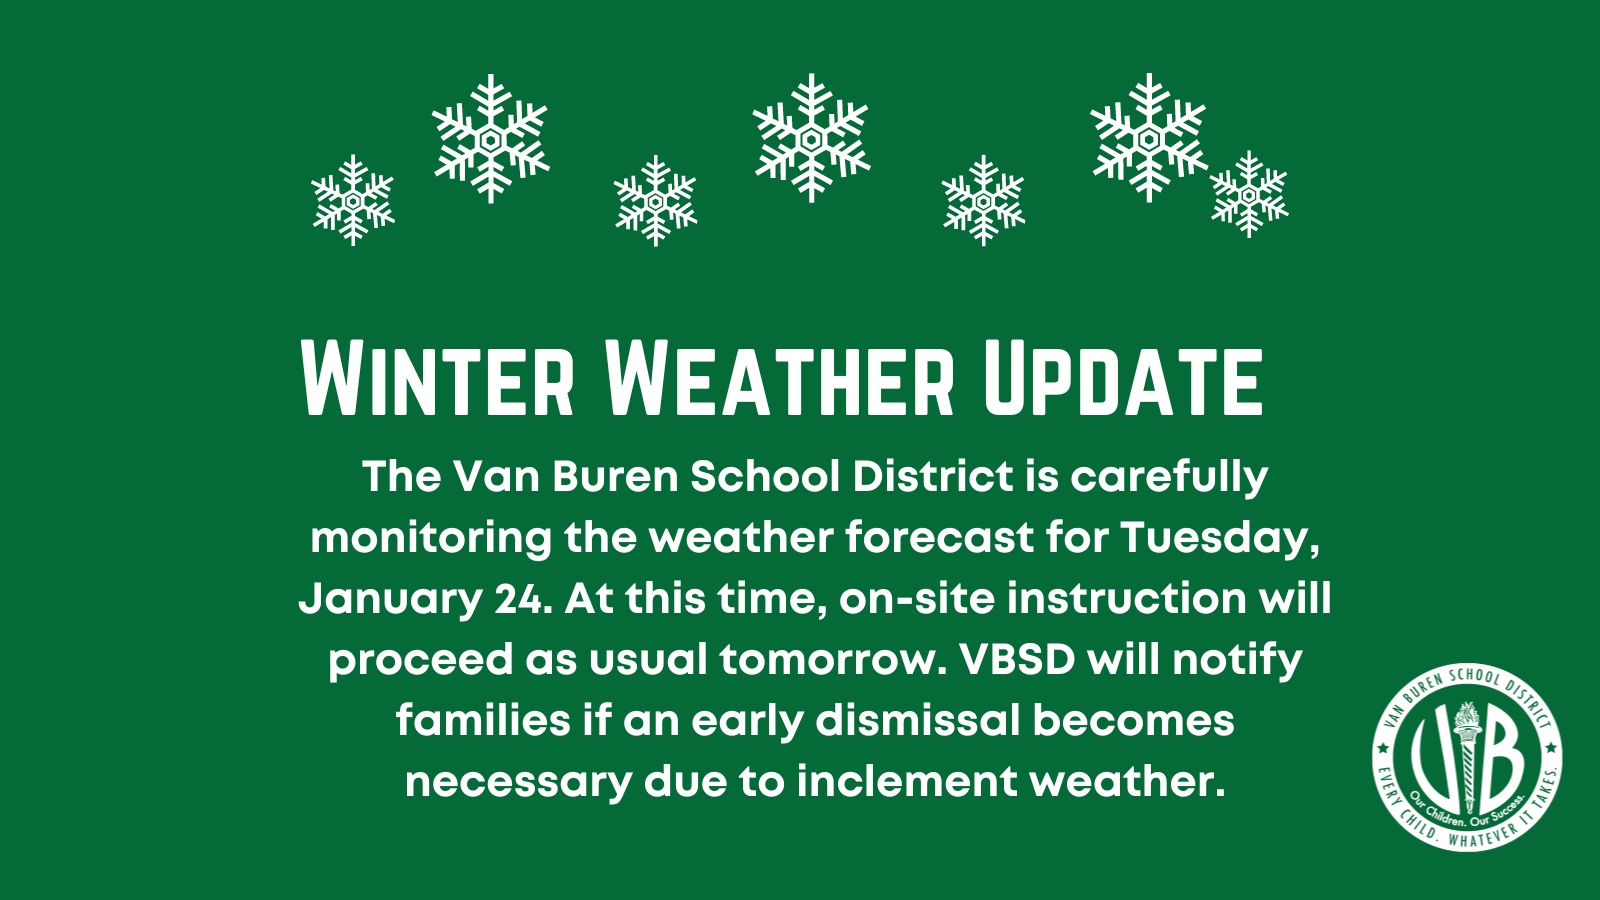 Winter Weather Update for January 24